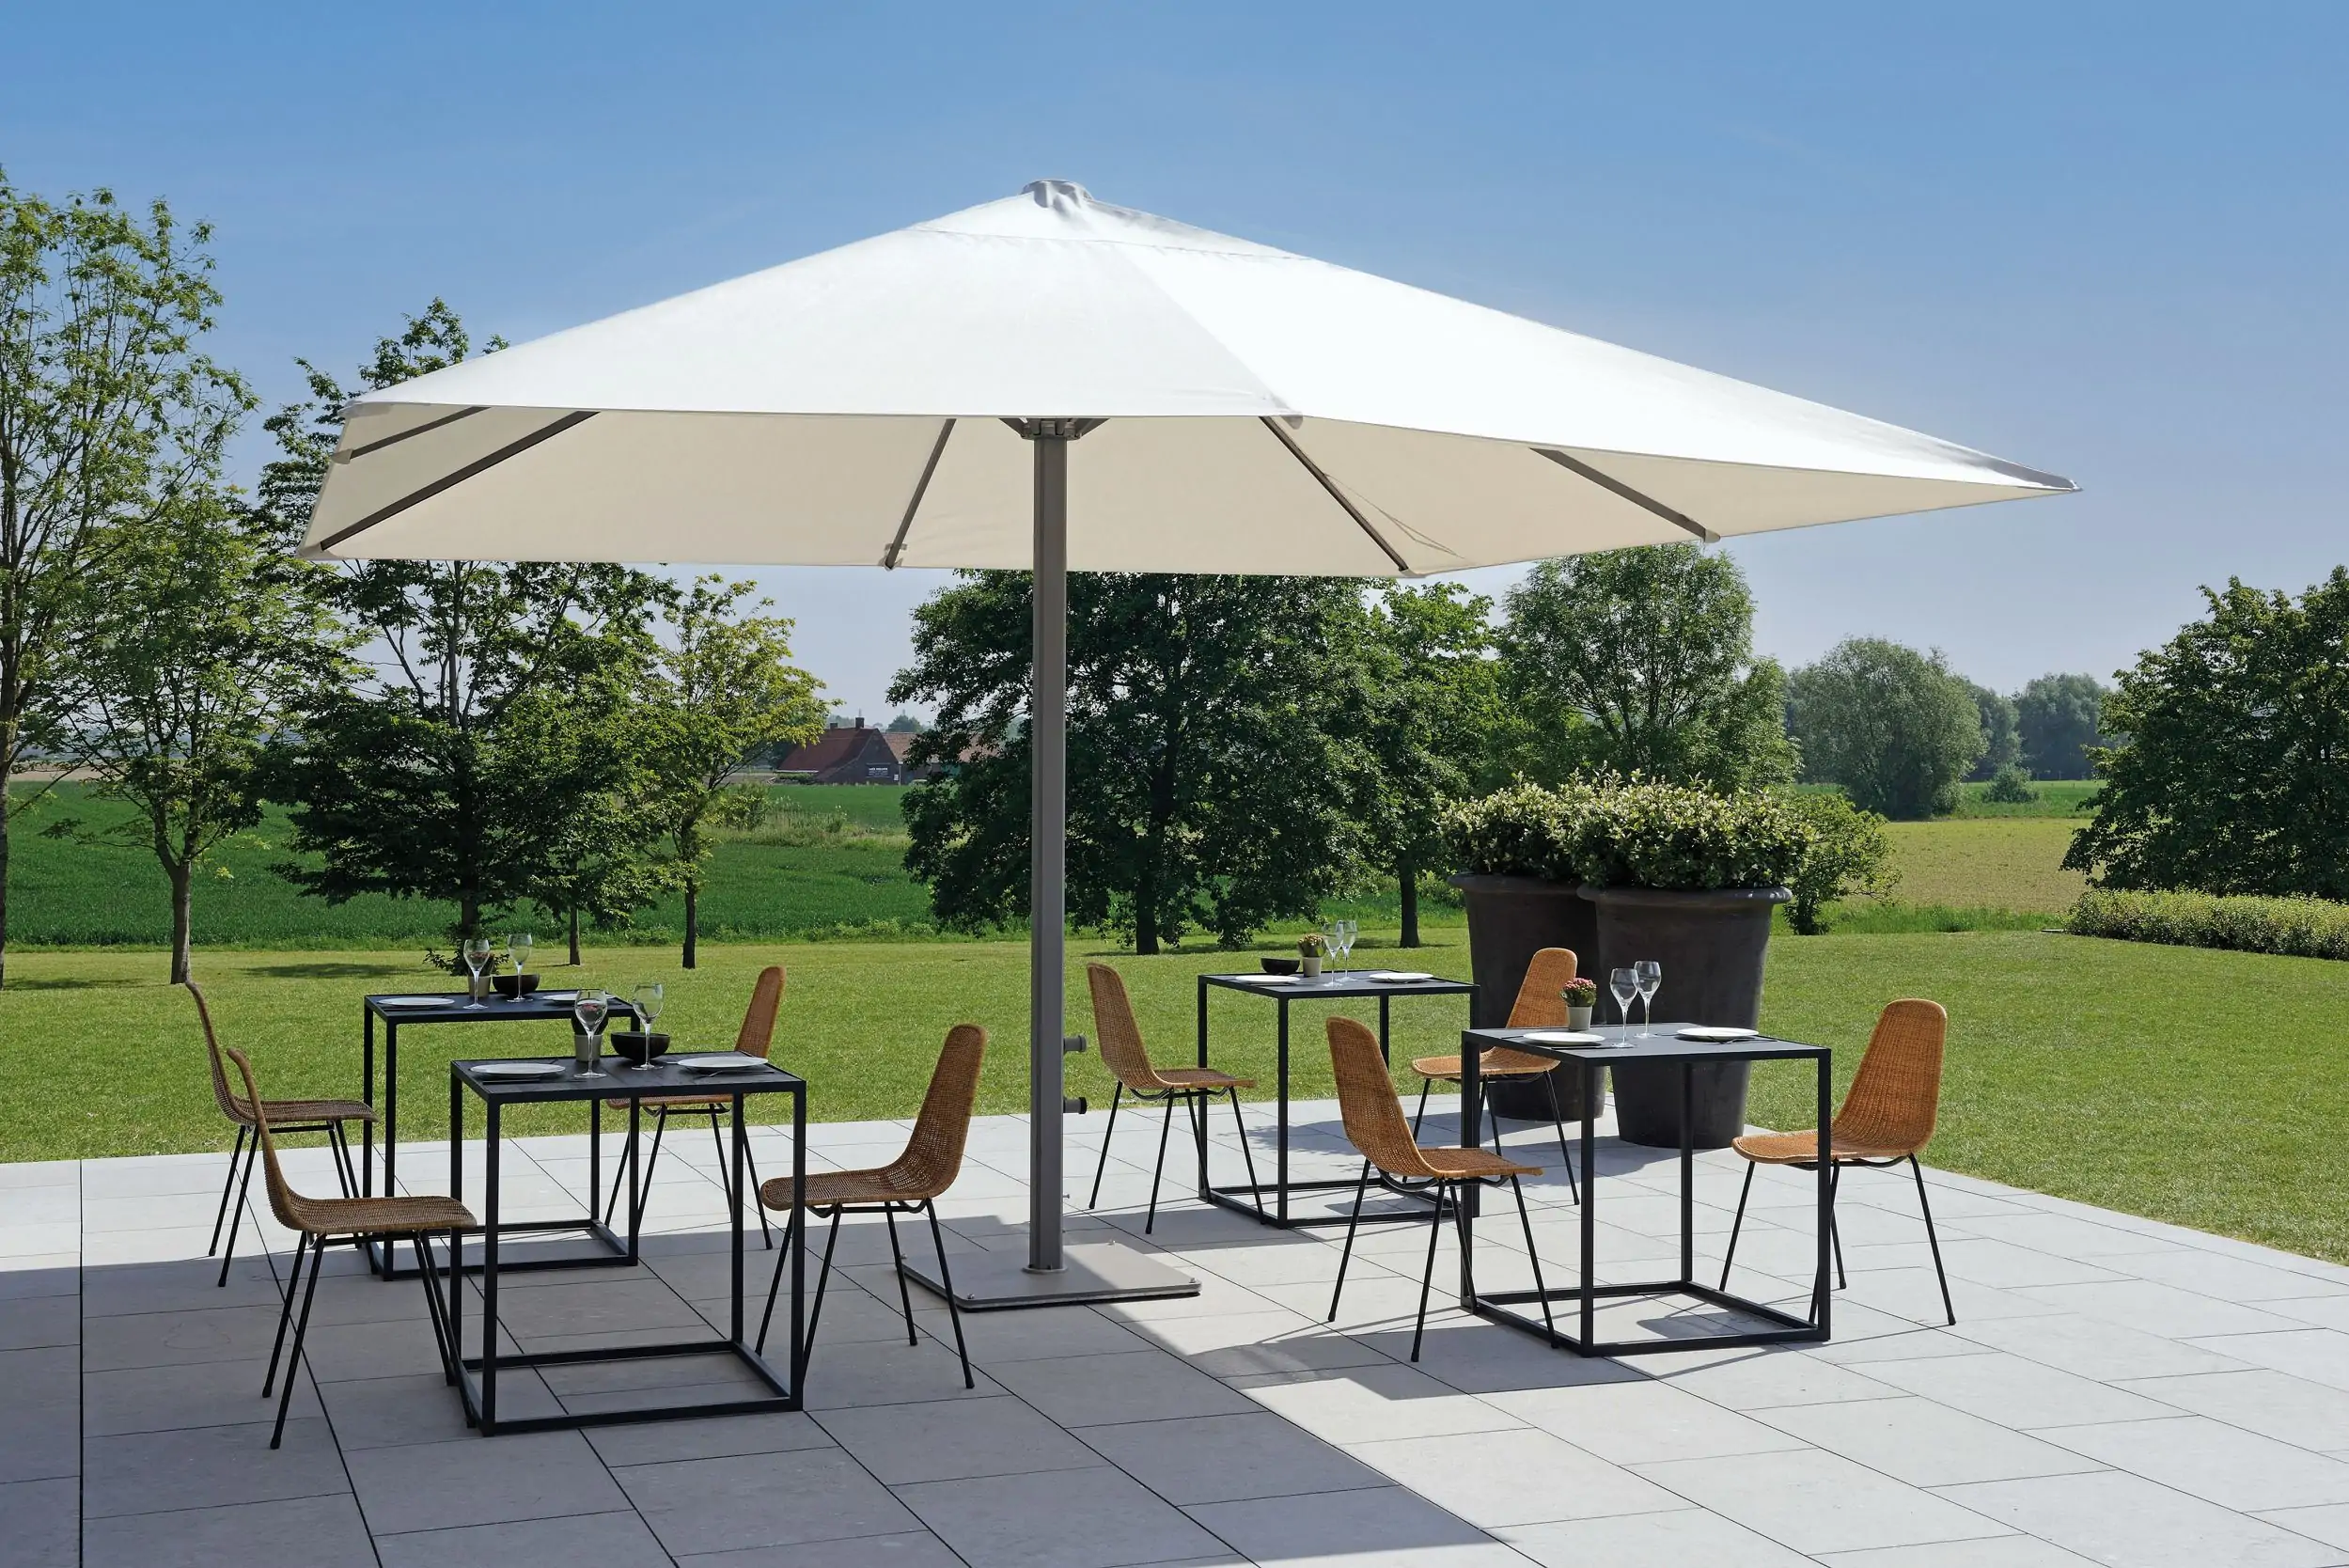 P8 umbrella on patio covering 4 small outdoor dining tables